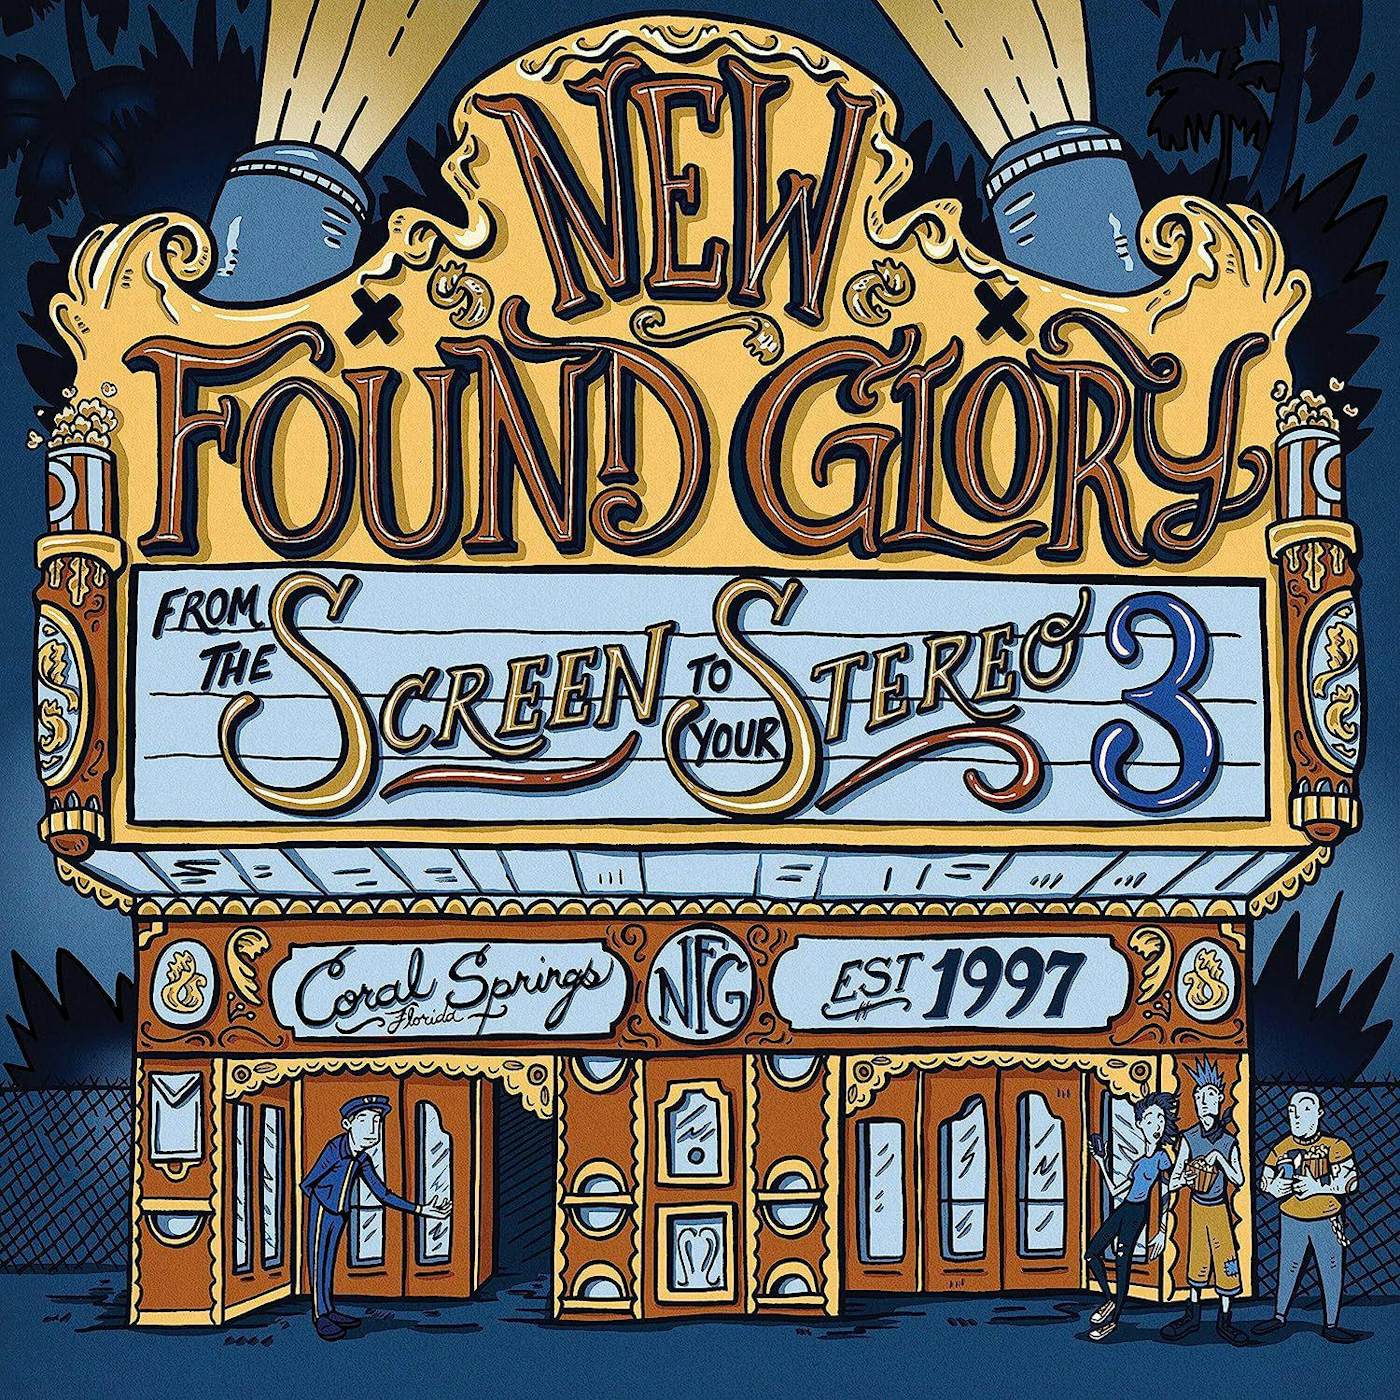 New Found Glory From The Screen To Your Stereo 3 Vinyl Record